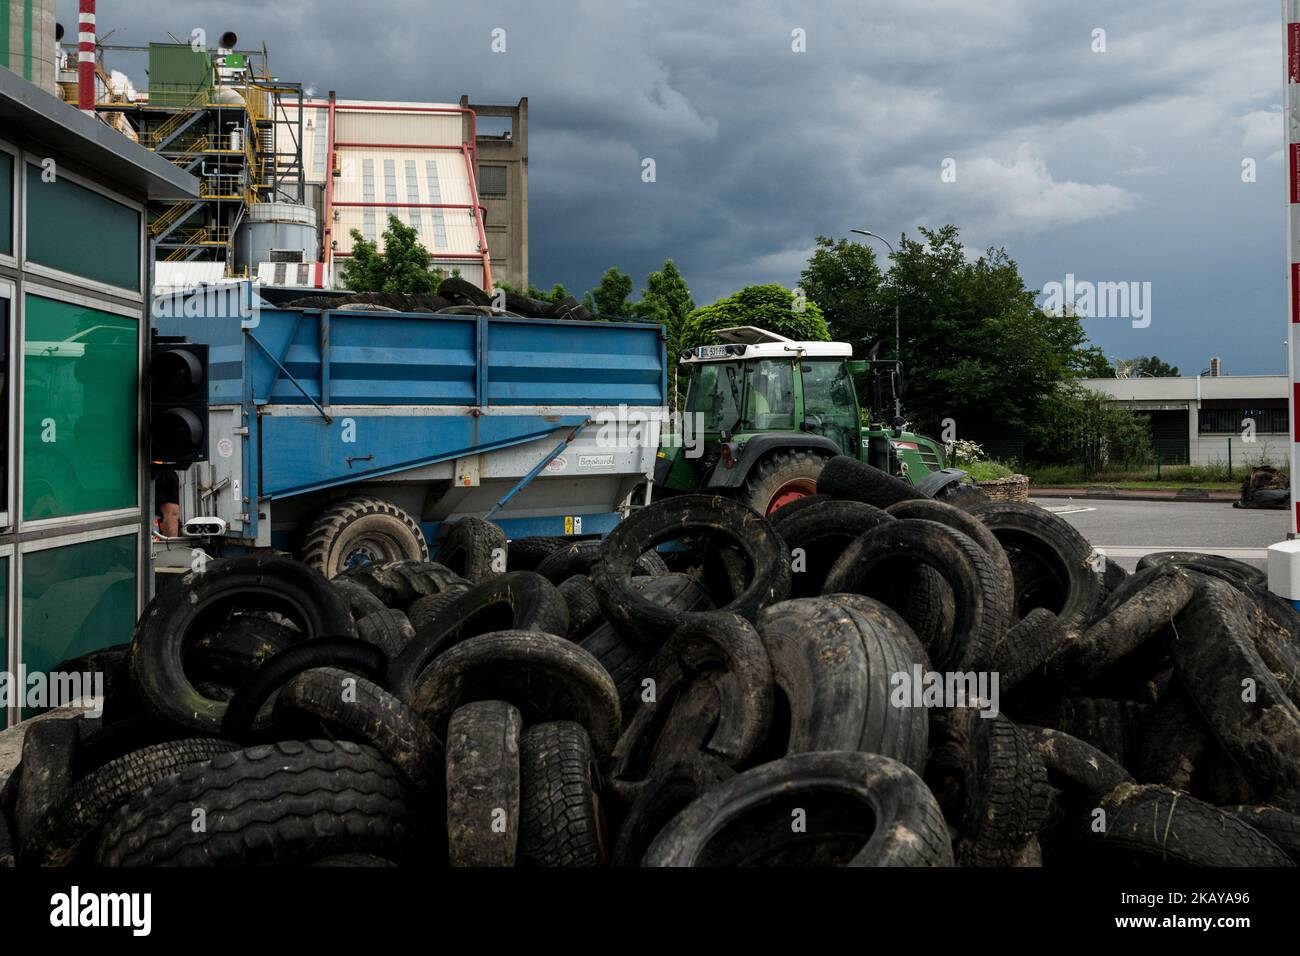 Blockade of the fuel depot Edouard Herriot port by farmers FNSEA and Young Farmers in Lyon, France, June 12, 2018. Protesters are against the revision of European financial aid, as well as against the massive importation of palm oil. Several refineries and fuel depots were blocked for a period of three days. (Photo by Nicolas Liponne/NurPhoto) Stock Photo